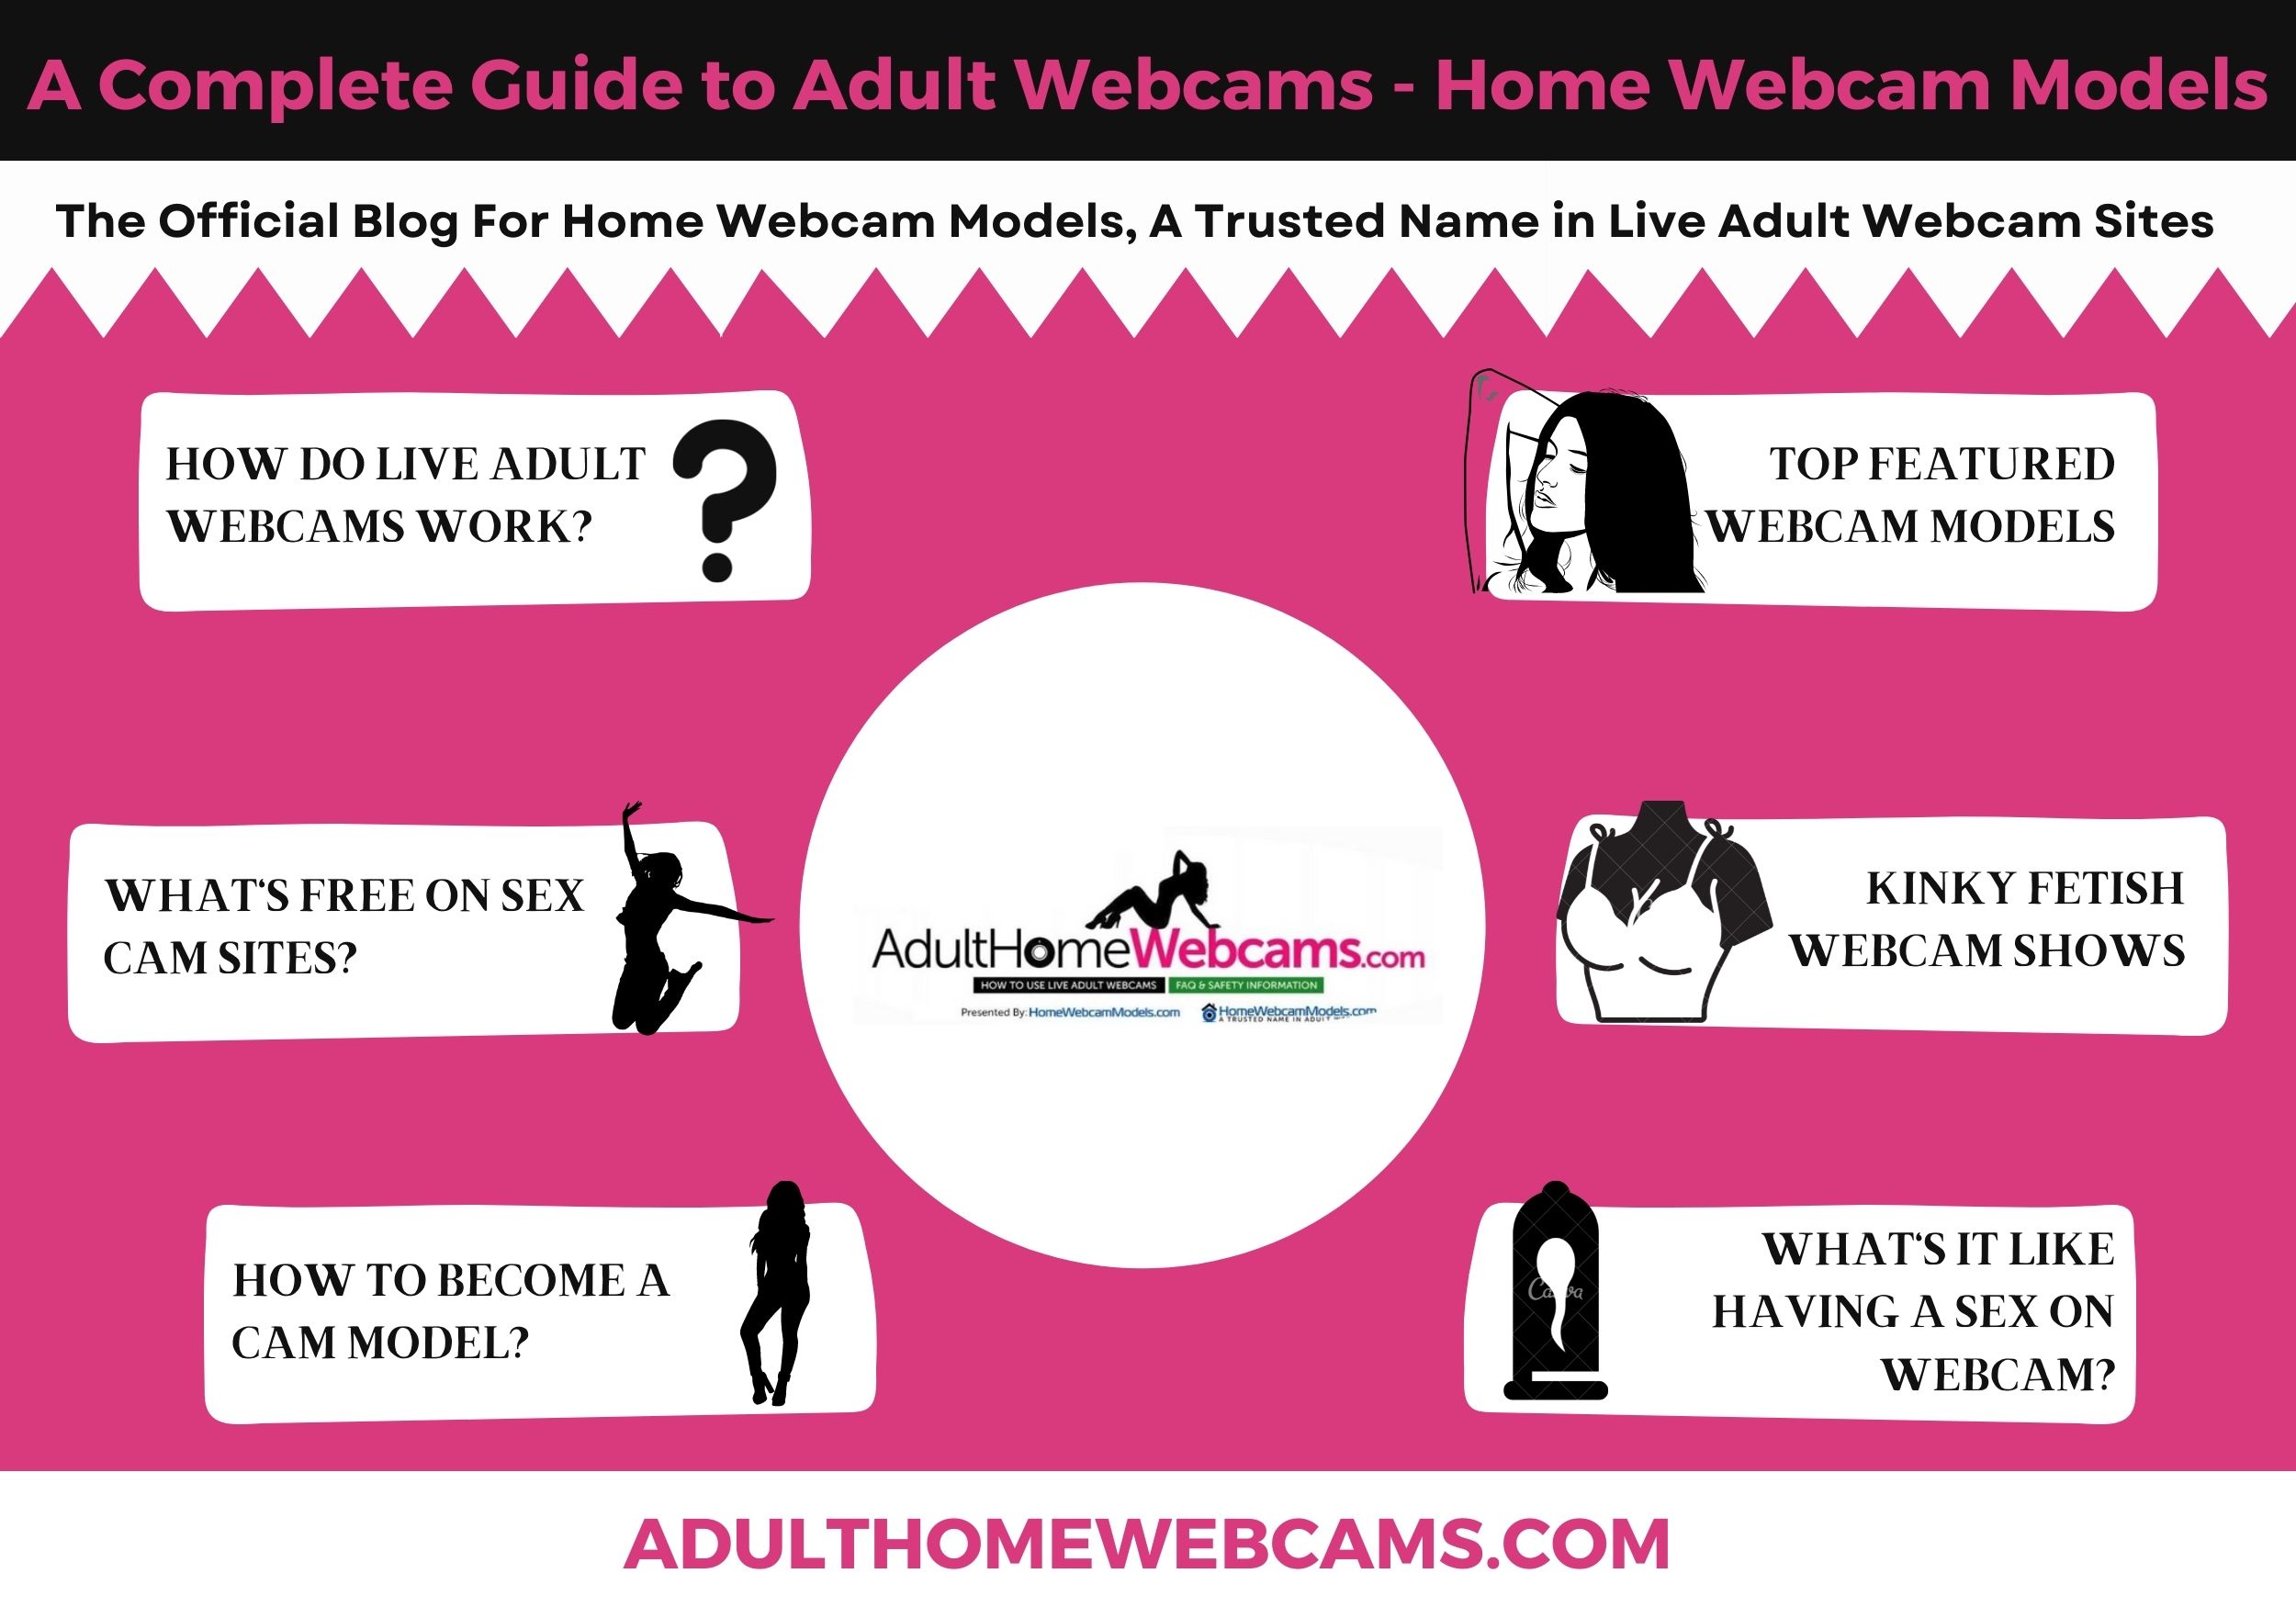 Guide to Adult Webcams Infographic